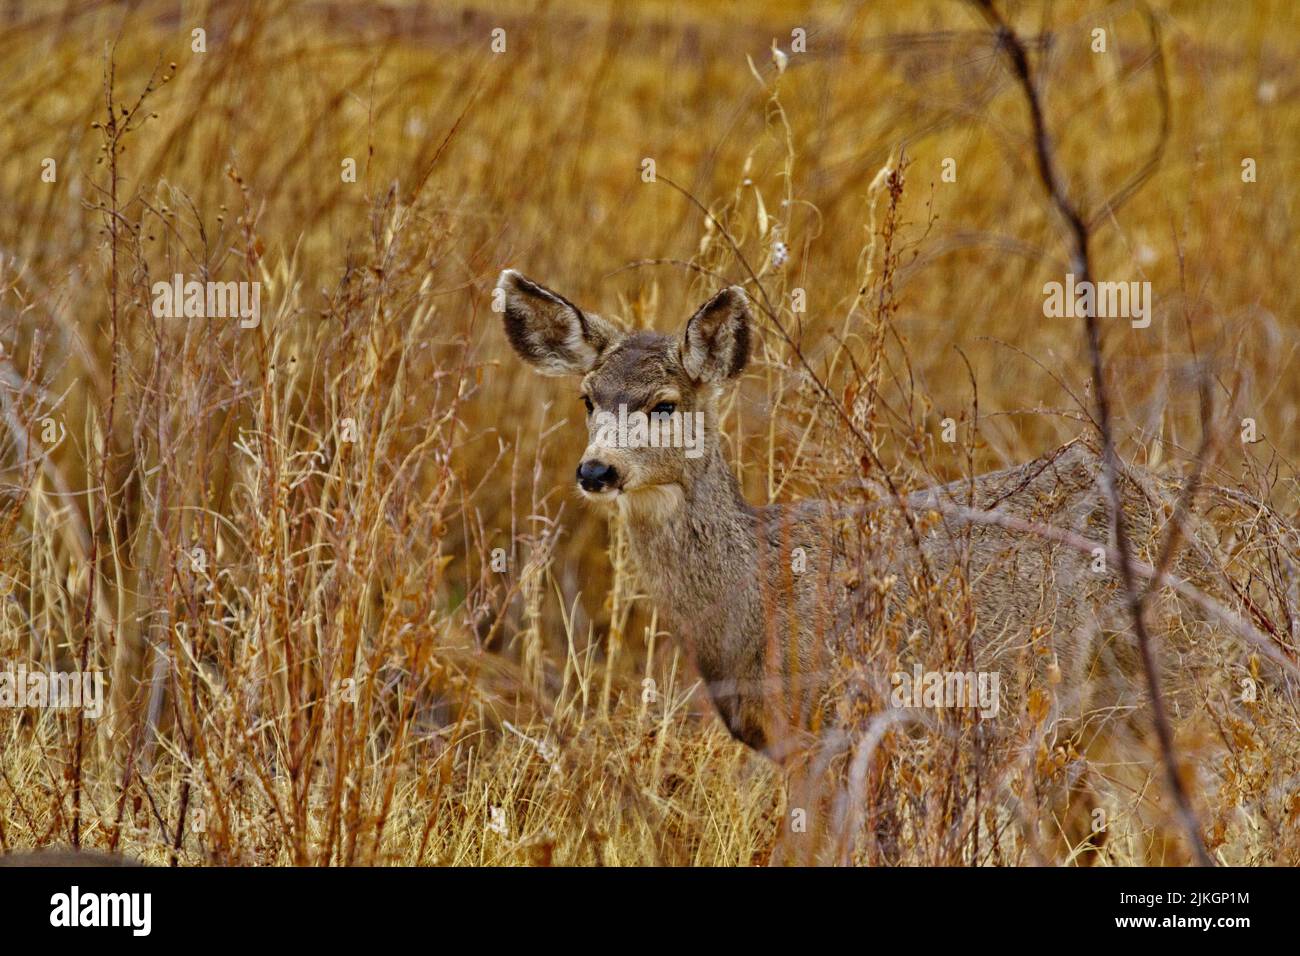 Alert deer in dry, golden autumn grass of New Mexico field at Bosque del Apache National Wildlife Refuge Stock Photo